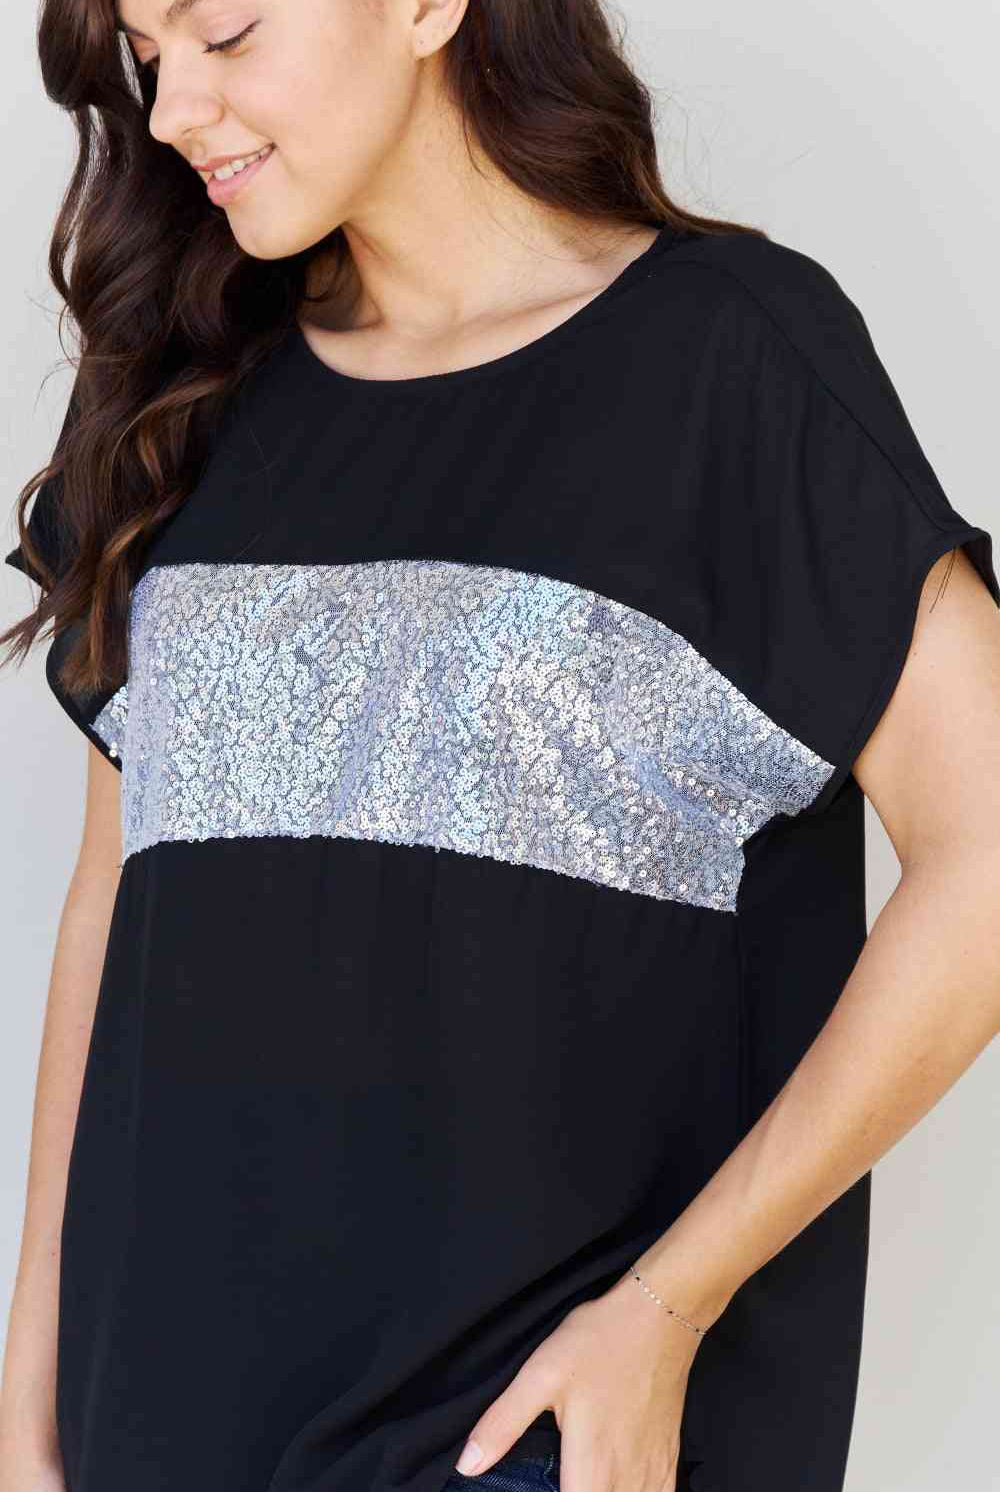 Gray Sew In Love Shine Bright Full Size Center Mesh Sequin Top in Black/Silver Clothing